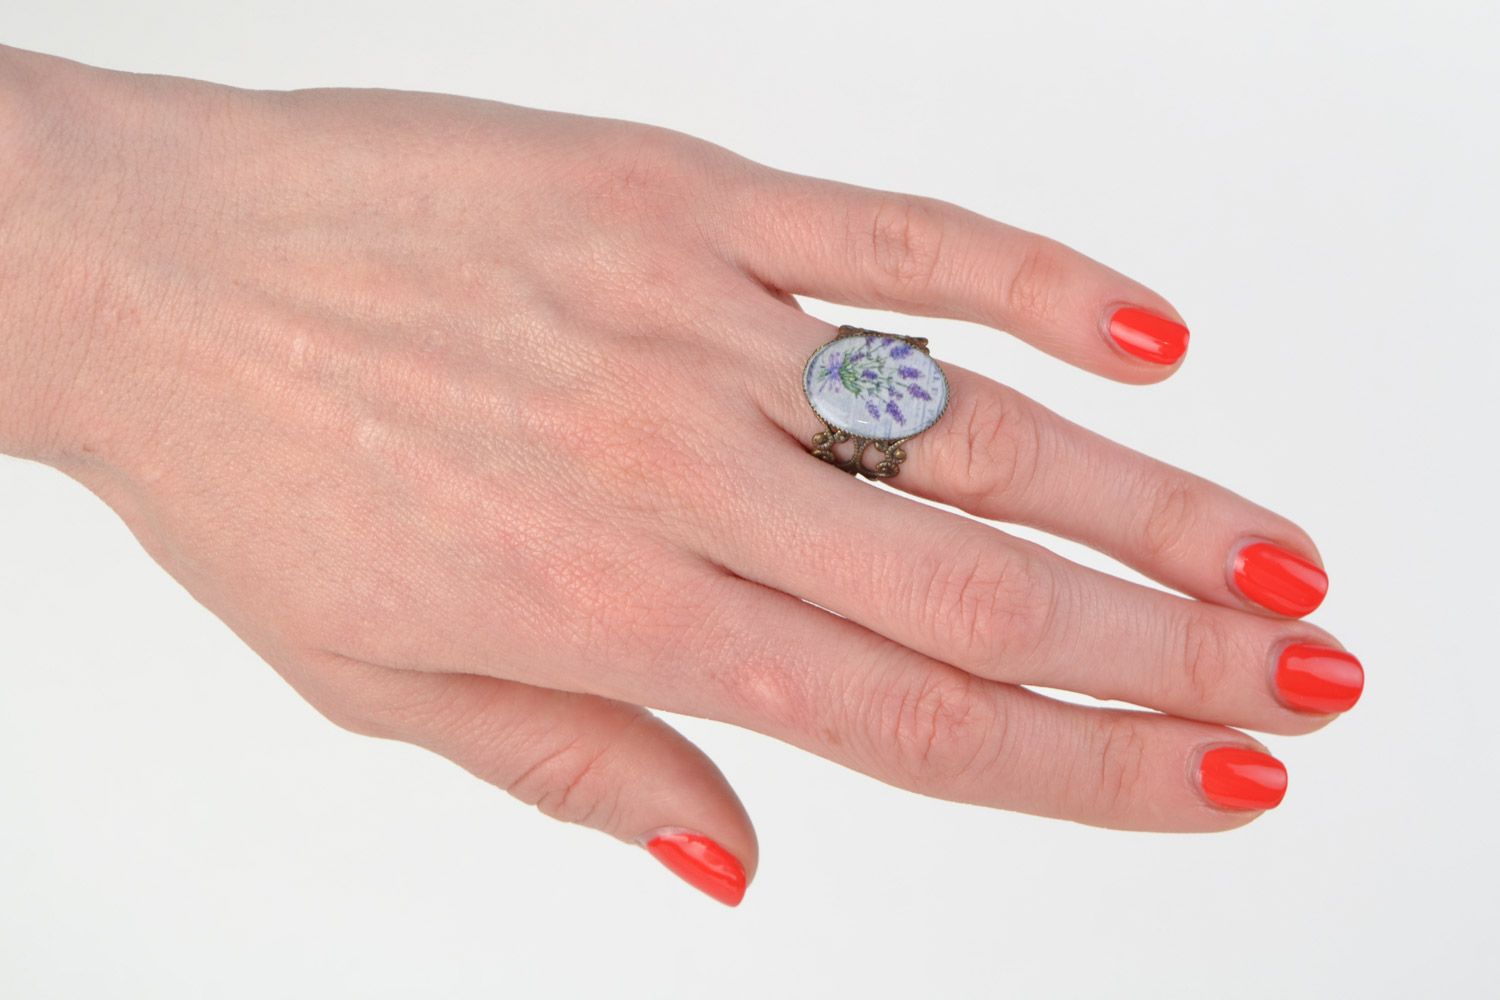 Handmade oval jewelry resin ring with lavender image photo 2